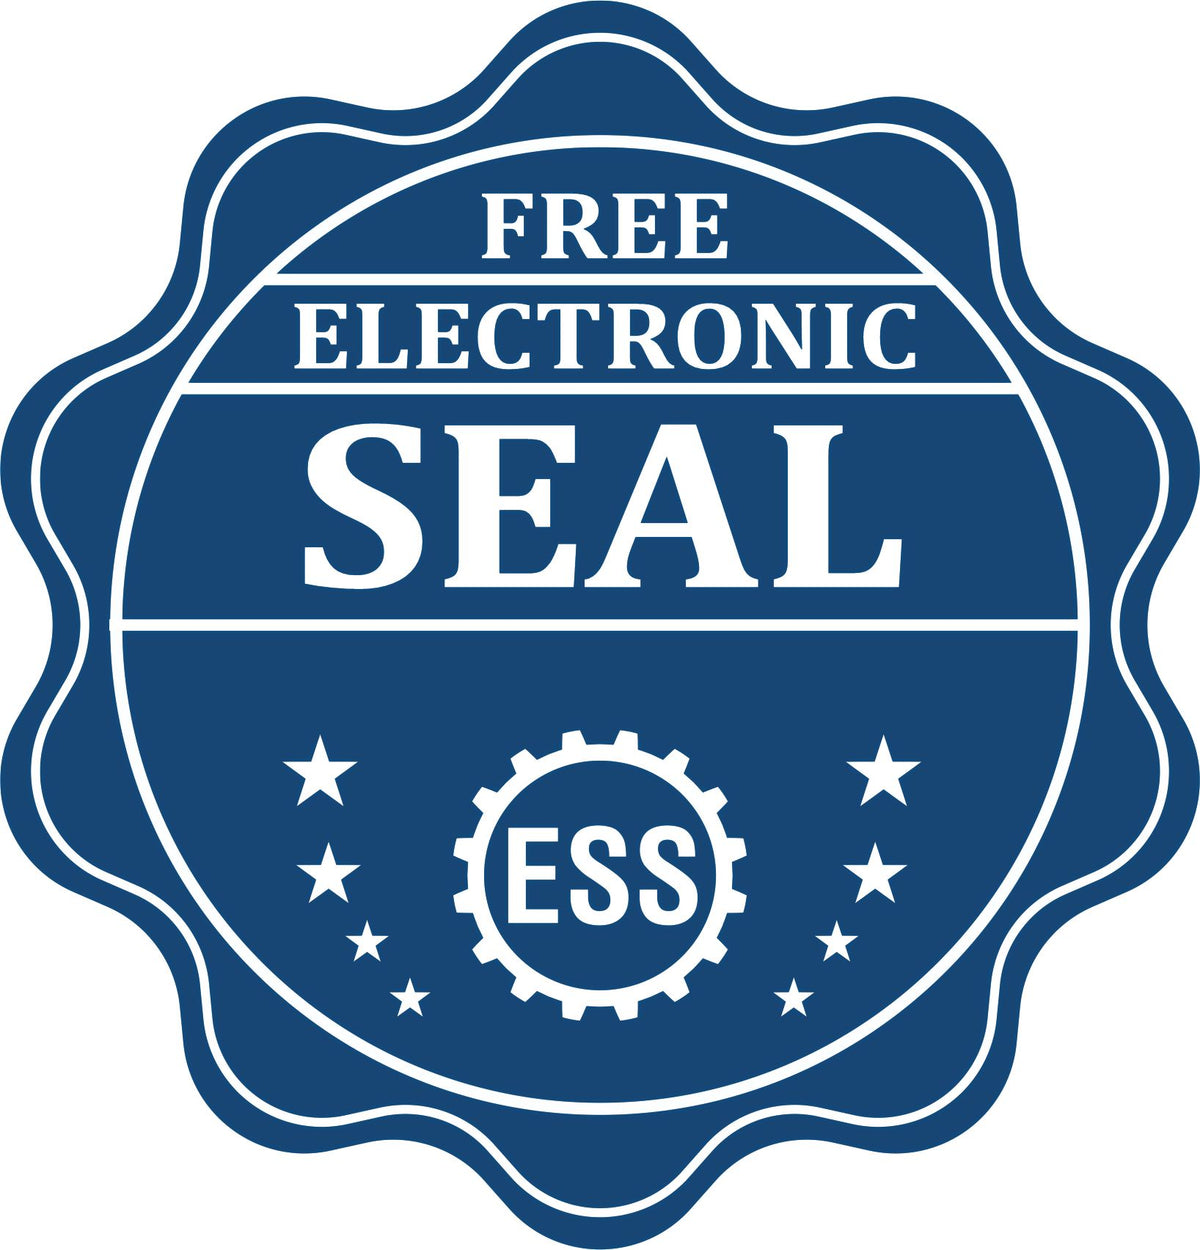 A badge showing a free electronic seal for the PSI Vermont Notary Stamp with stars and the ESS gear on the emblem.